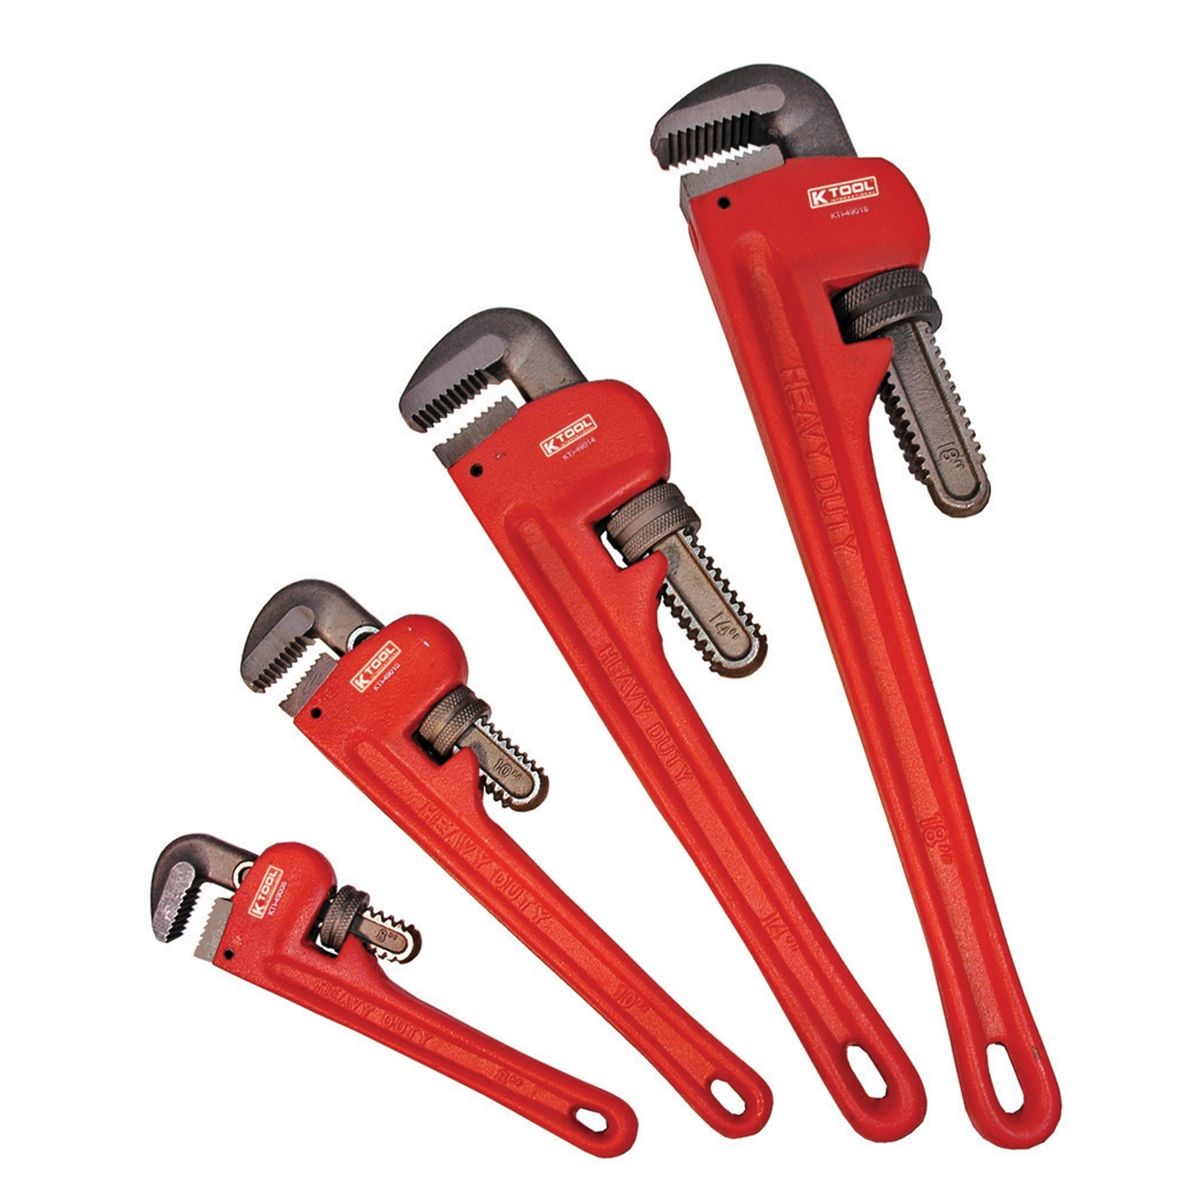 Pipe Wrench Set - 4 Piece